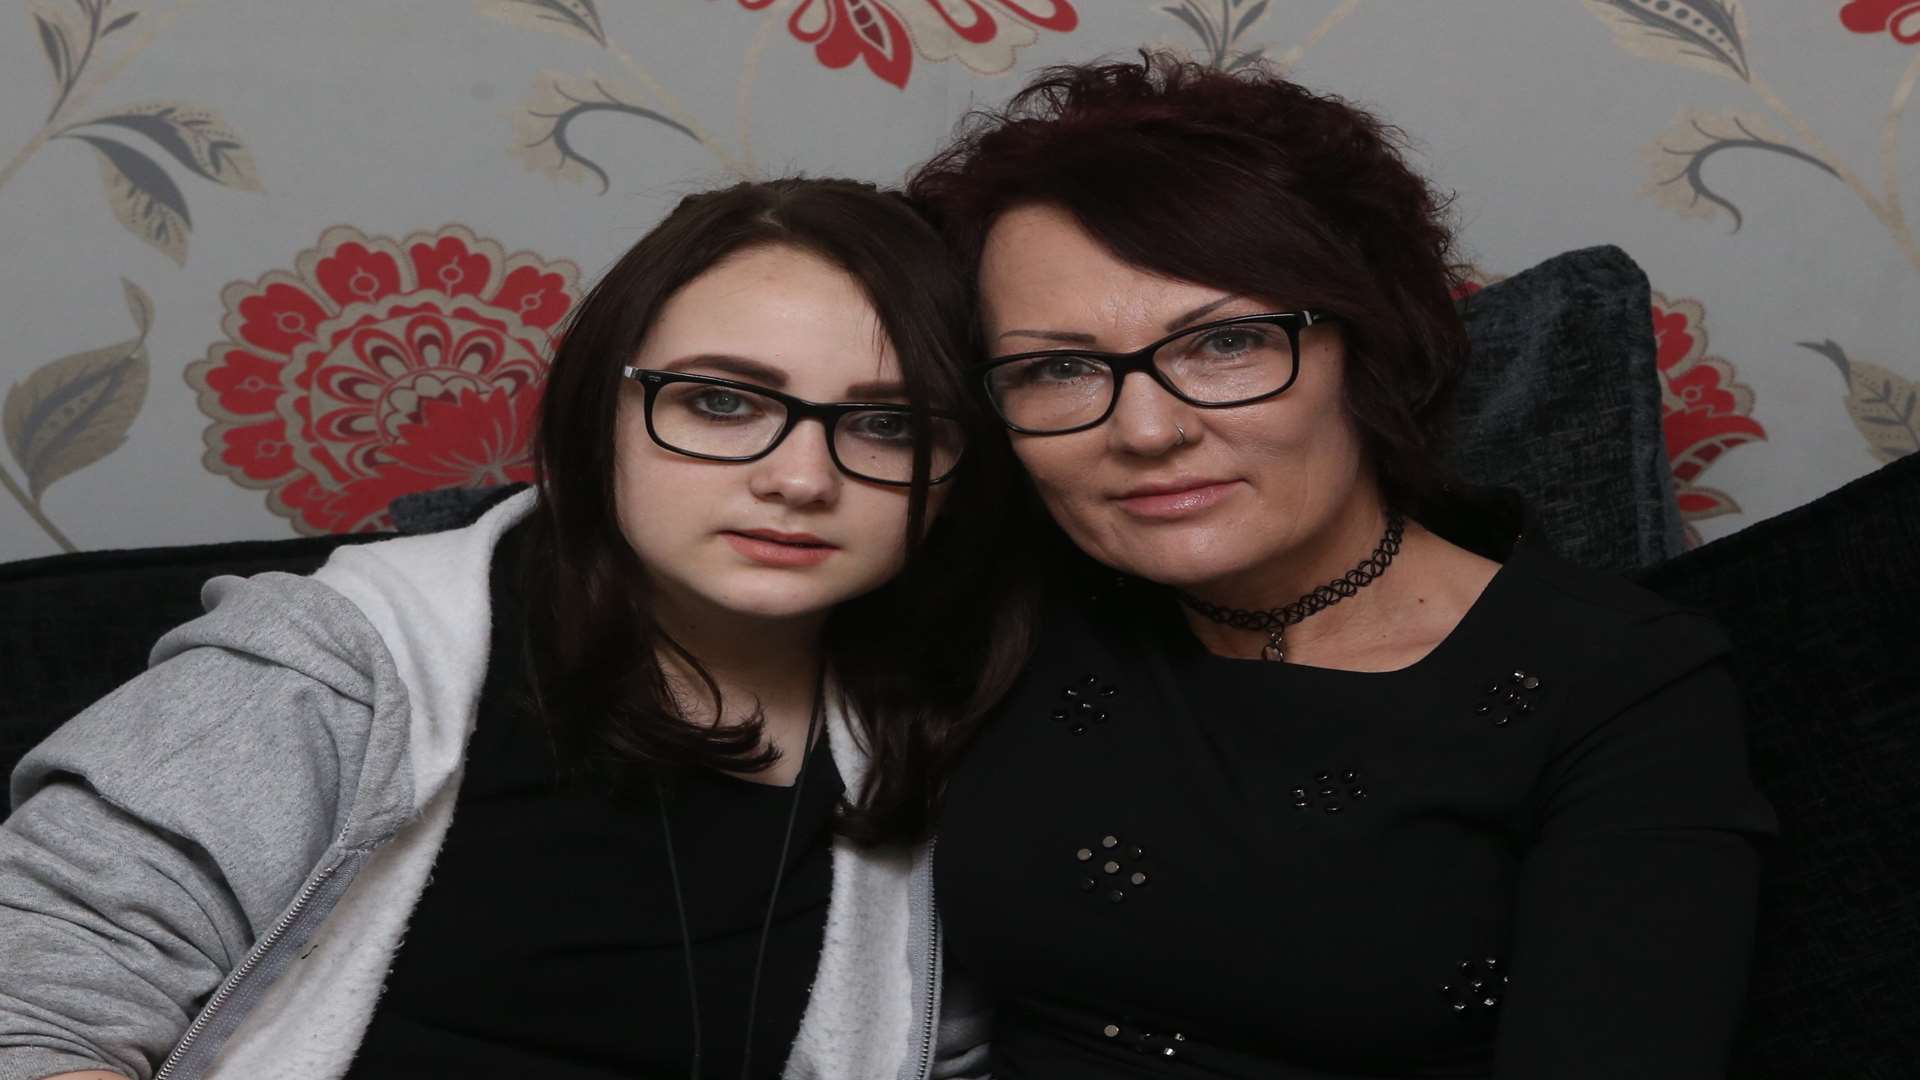 Alice Costen, 13, with her mum Susannah Dower